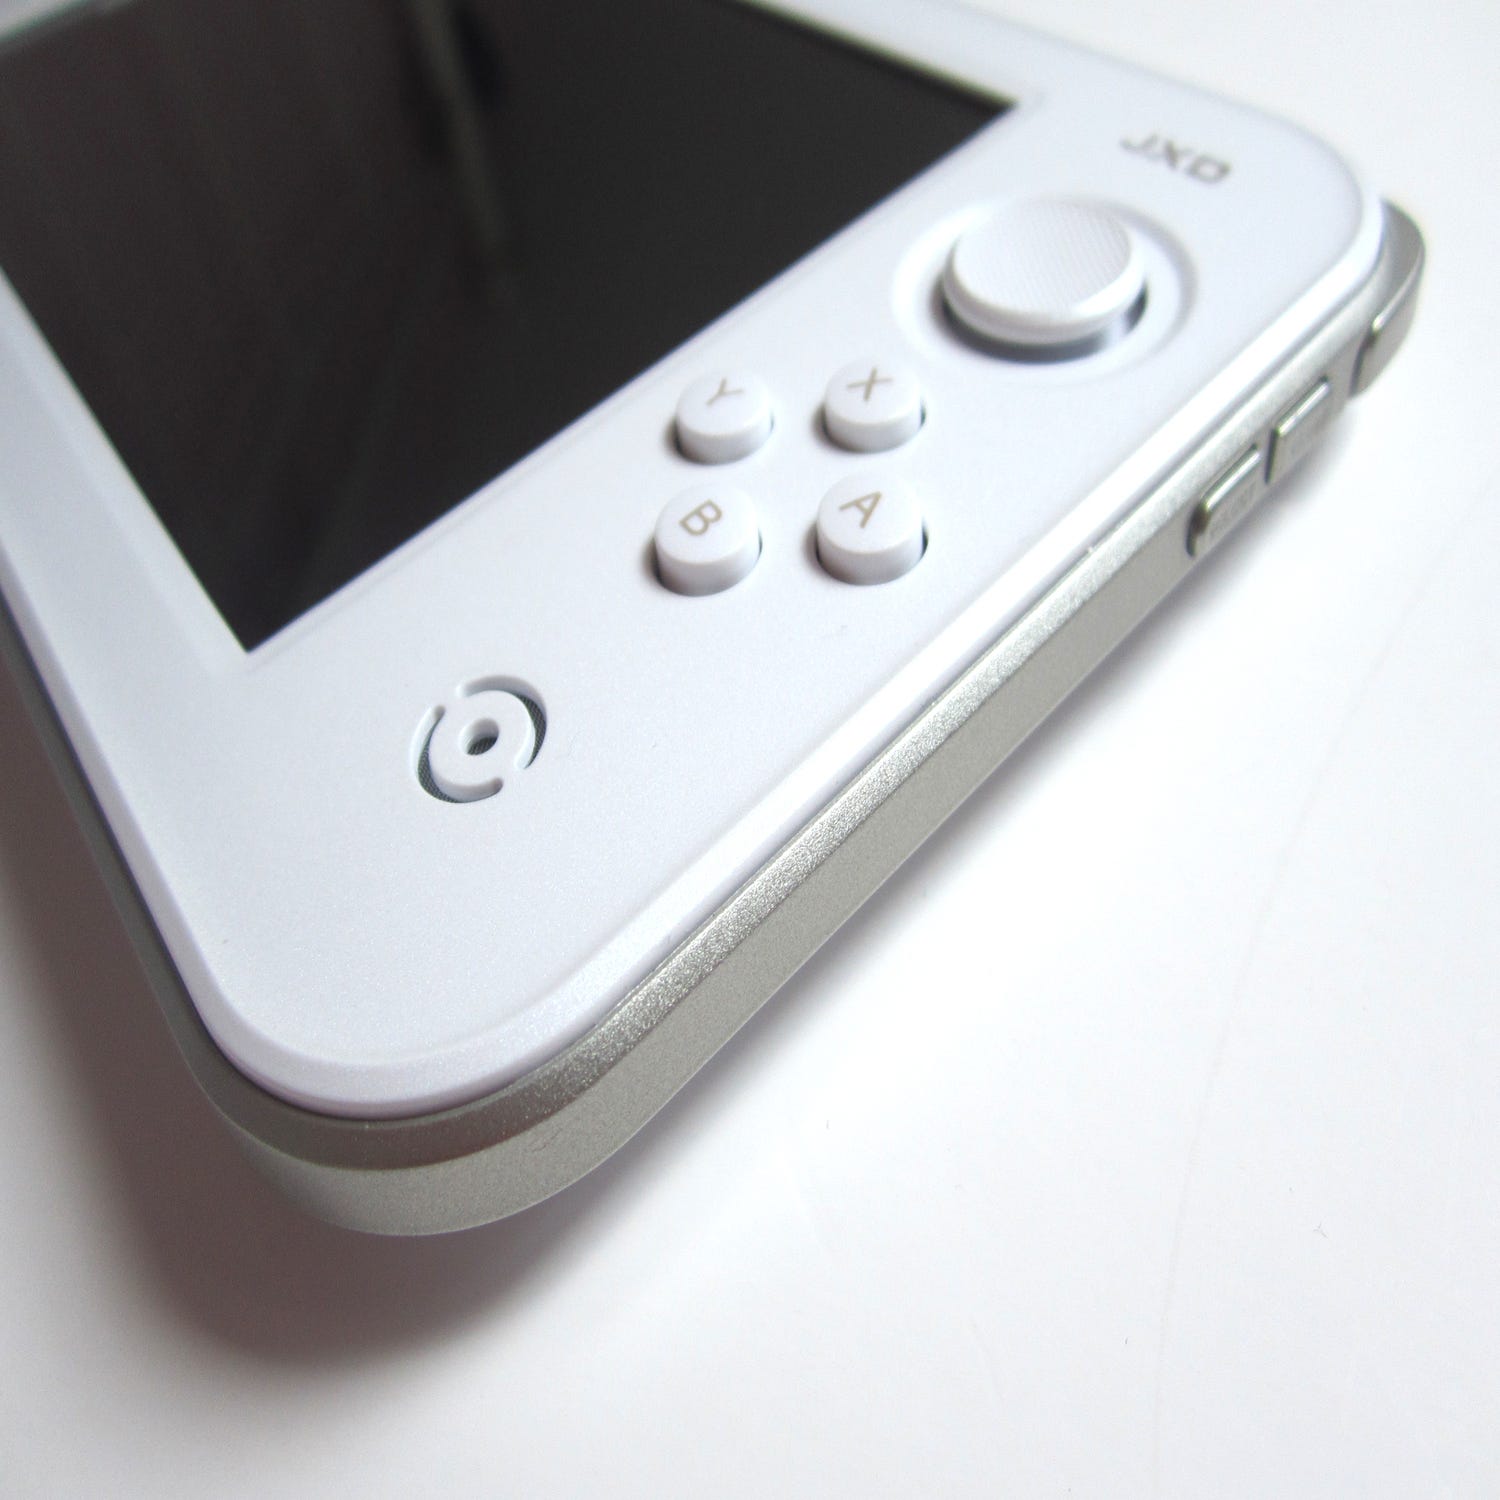 Wii U GamePad Android knock-off review